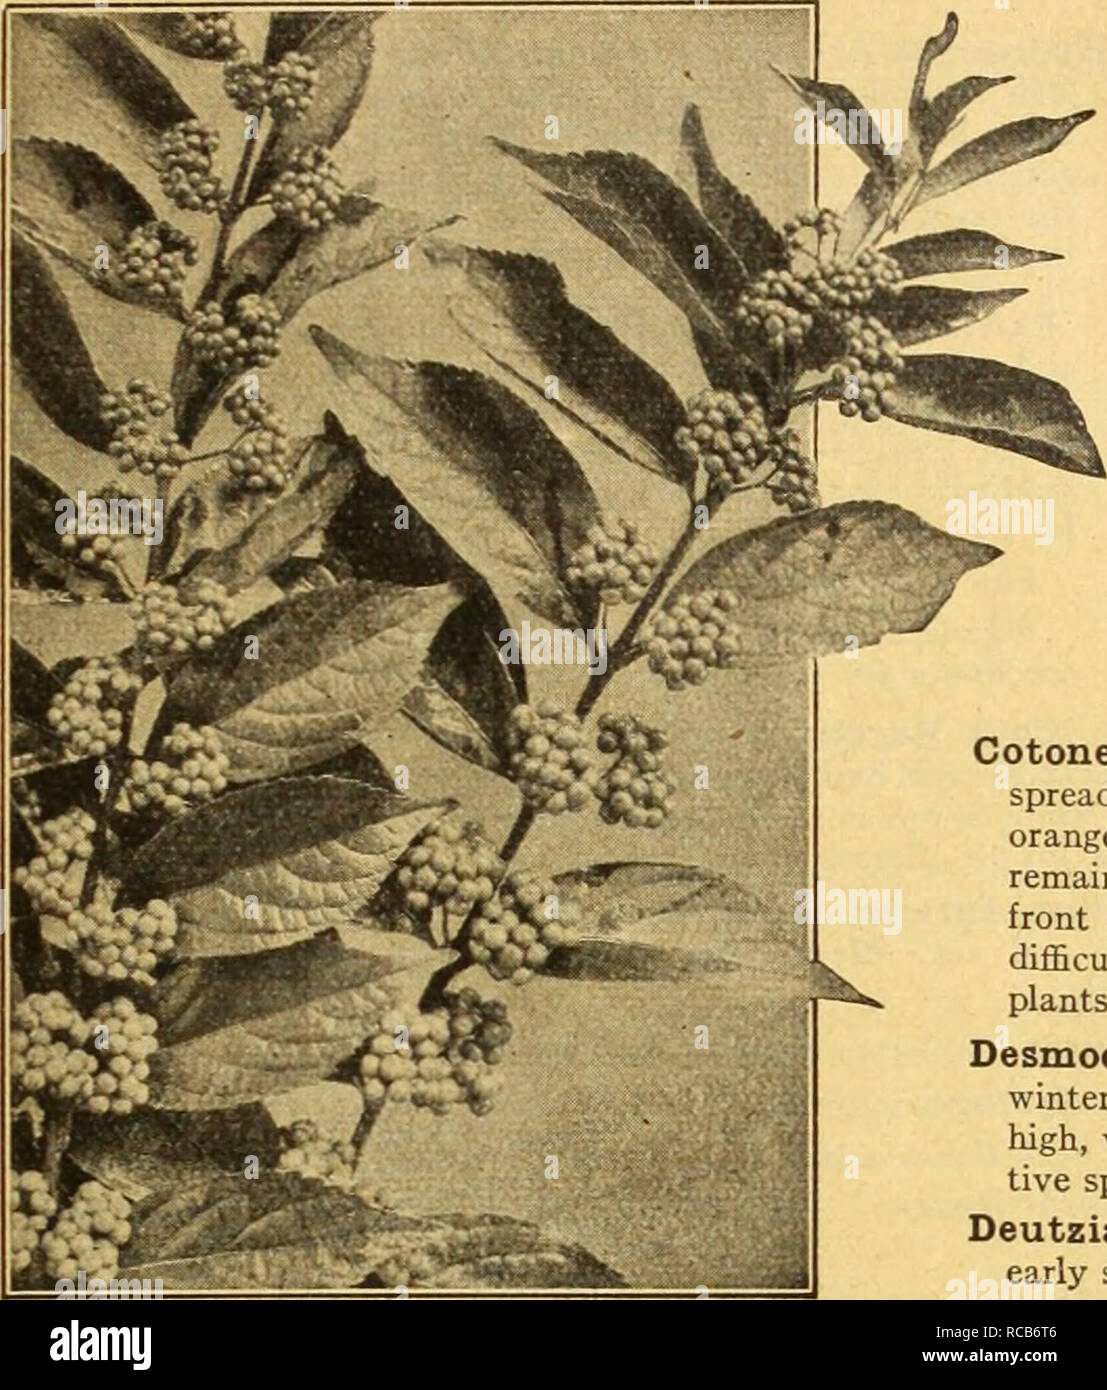 . Dreer's autumn catalogue 1926. Bulbs (Plants) Catalogs; Flowers Seeds Catalogs; Gardening Equipment and supplies Catalogs; Nurseries (Horticulture) Catalogs; Vegetables Seeds Catalogs. /flEfiiyAJimiffiwii,i»aA4ii.uiifci^HiLSP^ 61. C.vLLicARPA Purpurea Andromeda Japonica. An evergreen compact growing low shrub, with small dark green foliage and long panicles of dull bronzy-red buds which appear during the summer and are attractive during the entire winter, opening into white Howers in spring. Bushy plants, 15 to 18 inches high, $1.50 each. Aralia Pentaphylla. A very distinct ornamental Shrub  Stock Photo